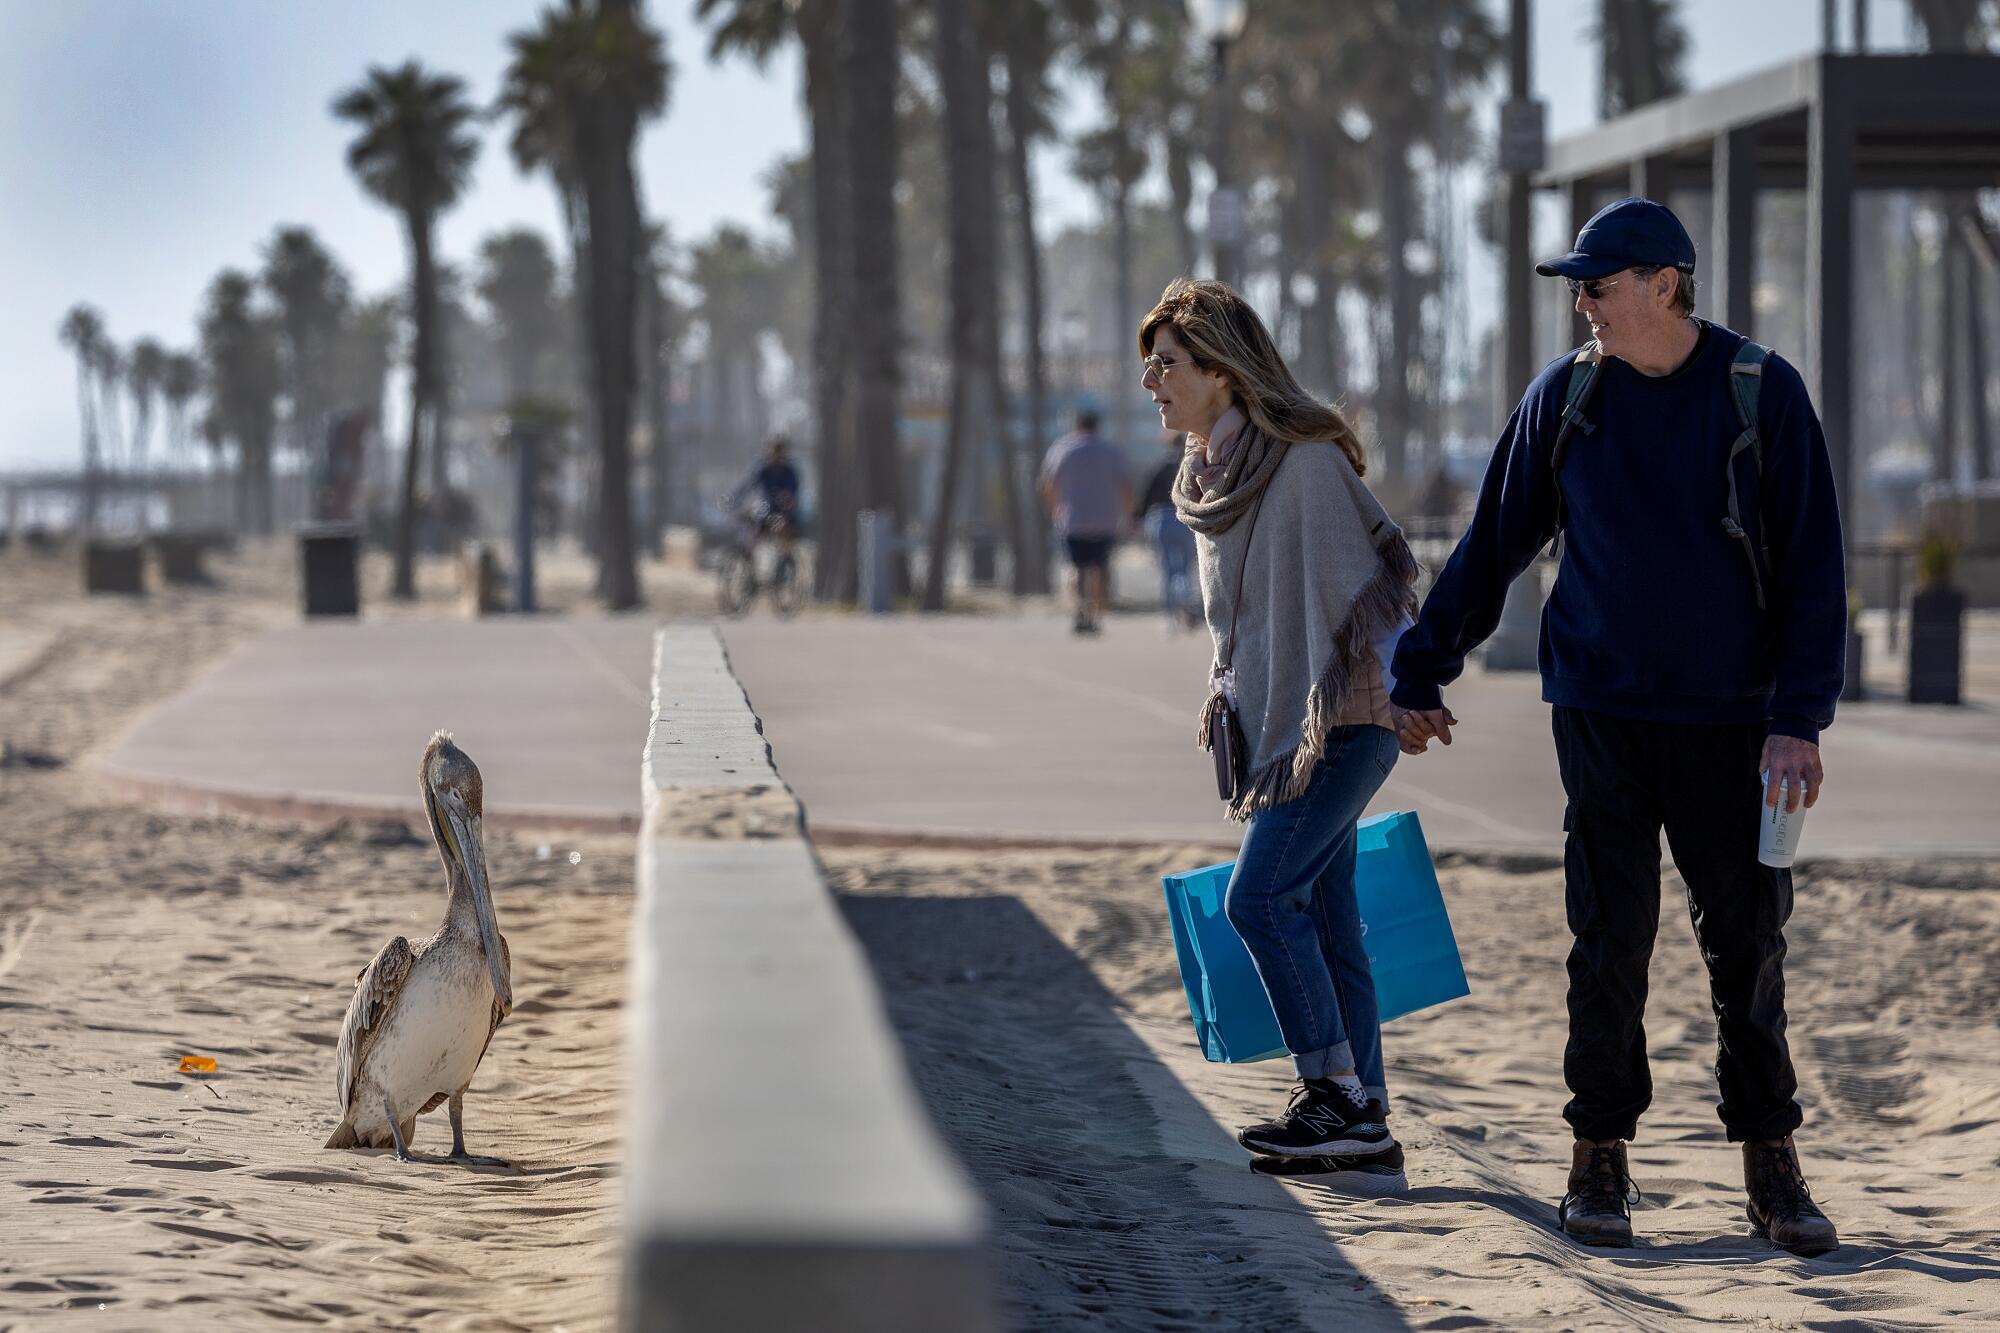 A sick pelican stands alone as beach-goers pass by in in Huntington Beach.